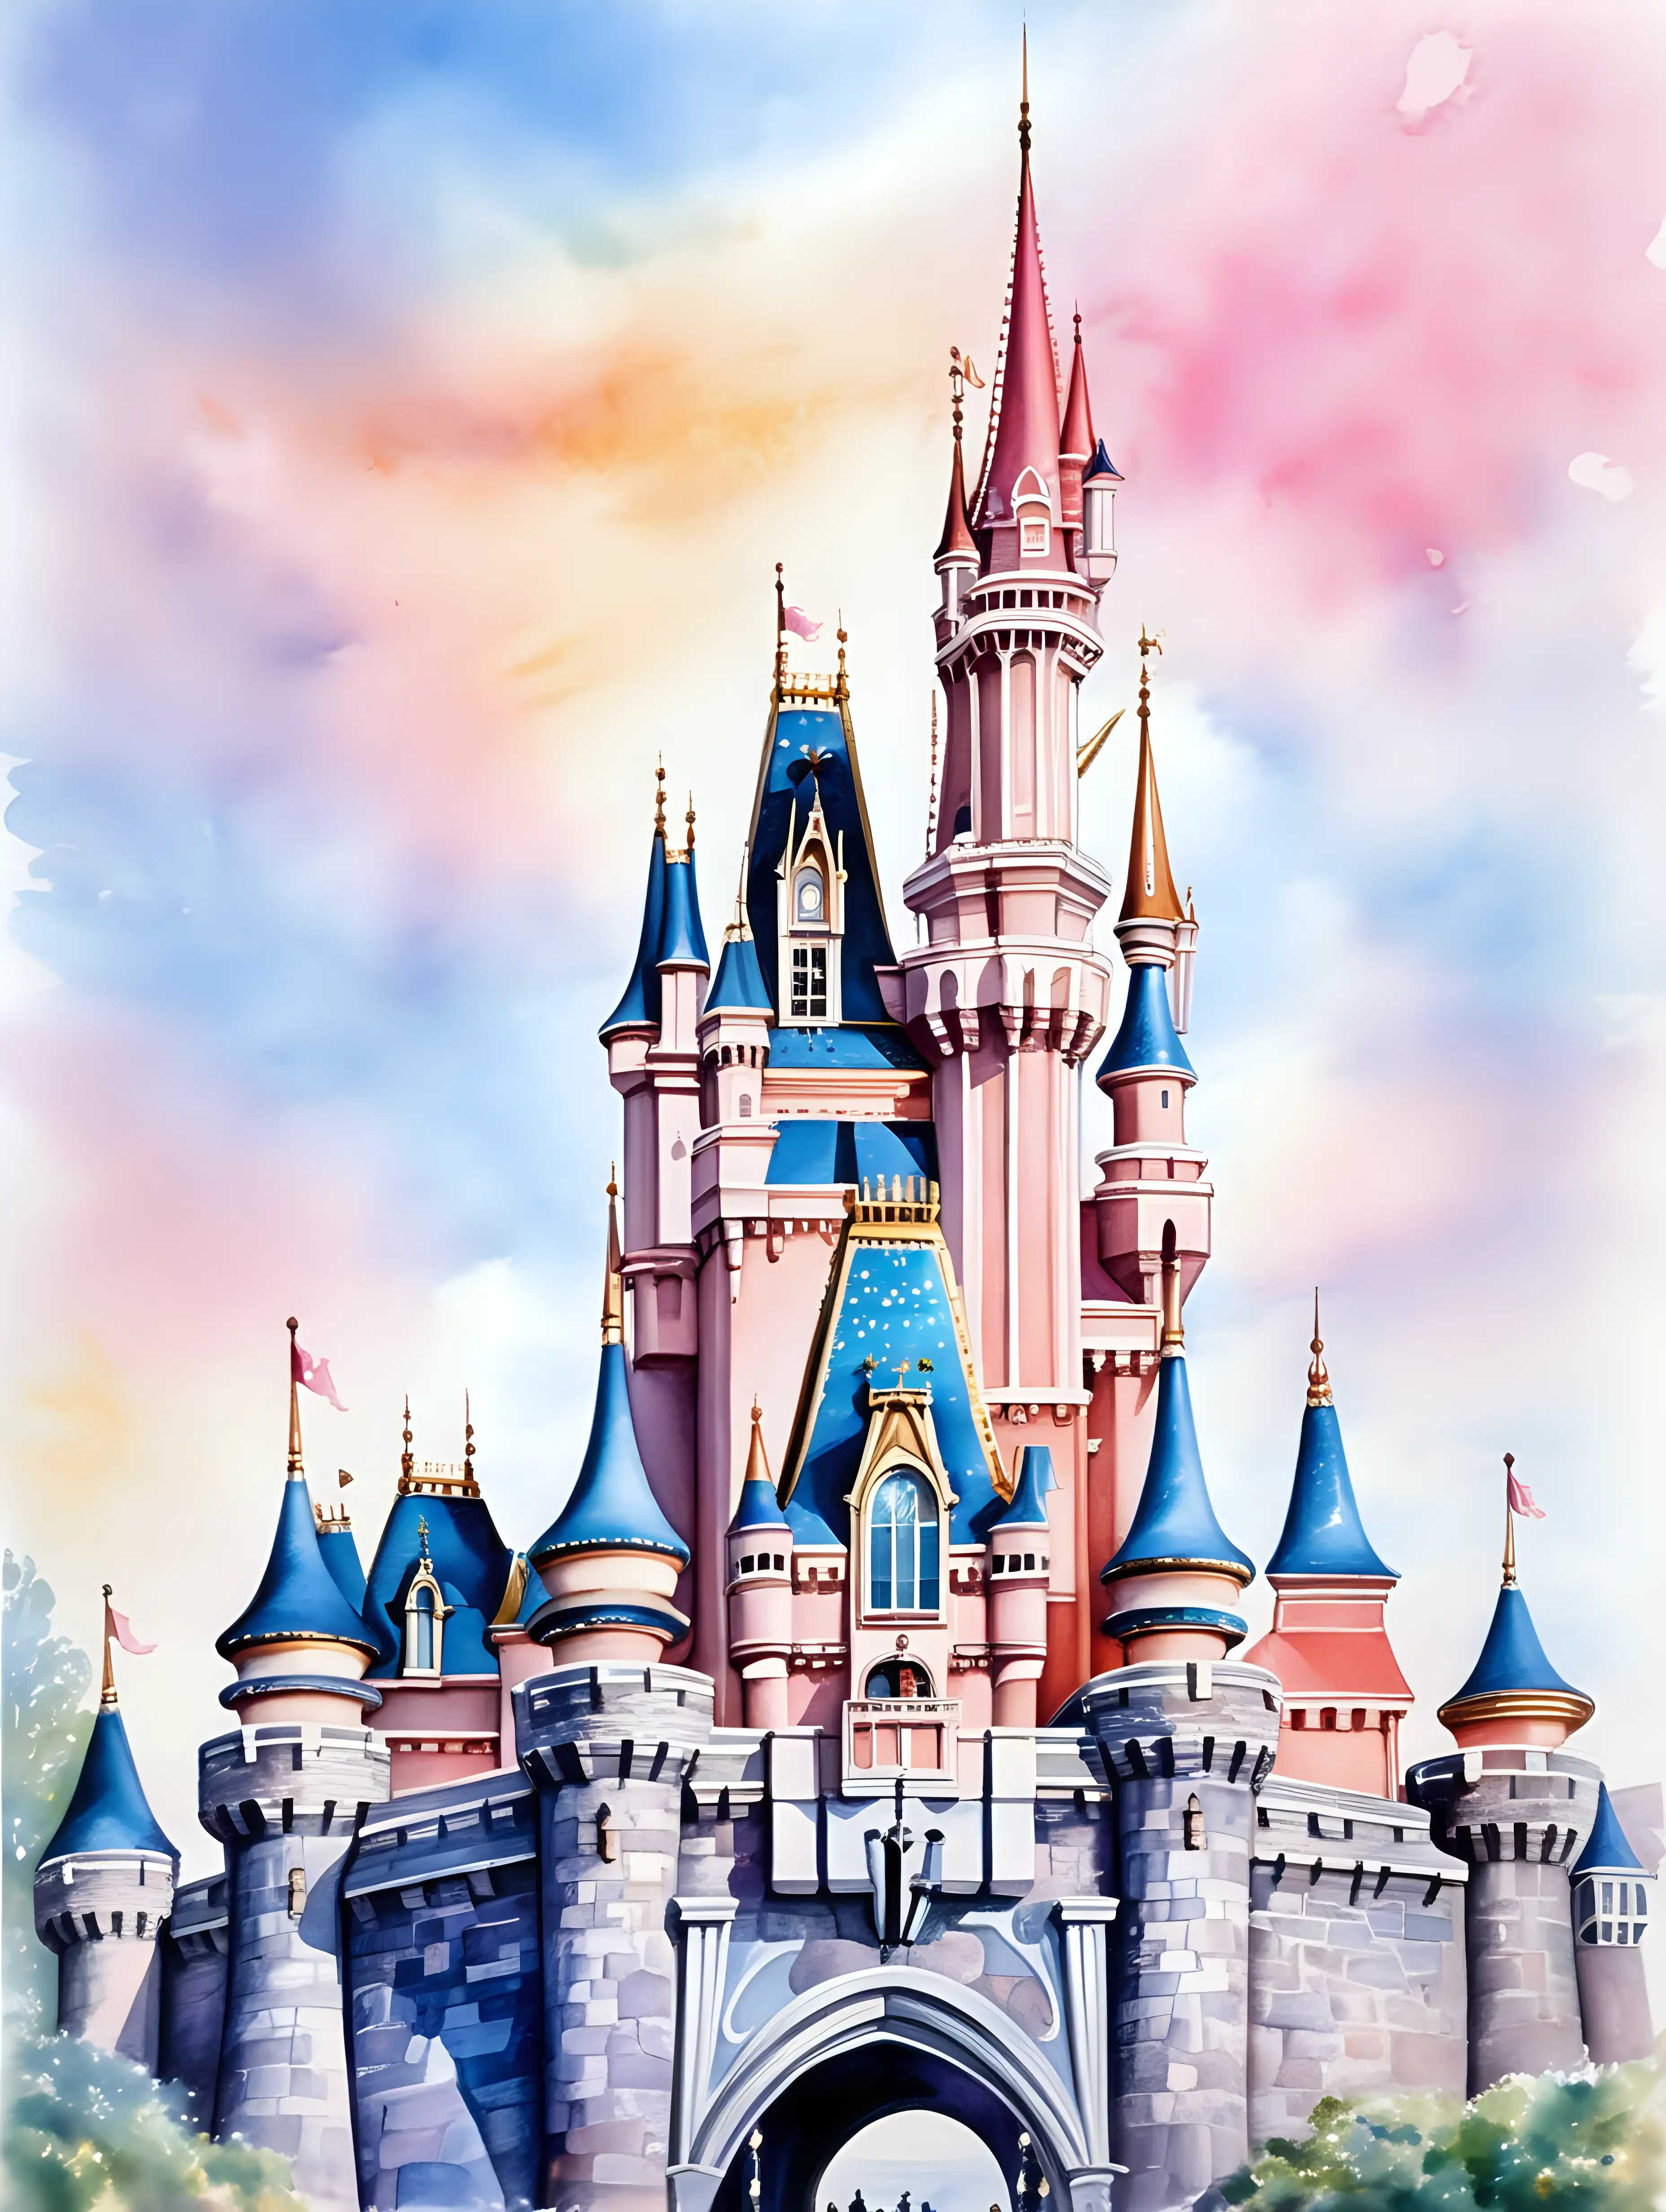 Majestic Disneyland Castle Watercolor Painting in Bright Daylight